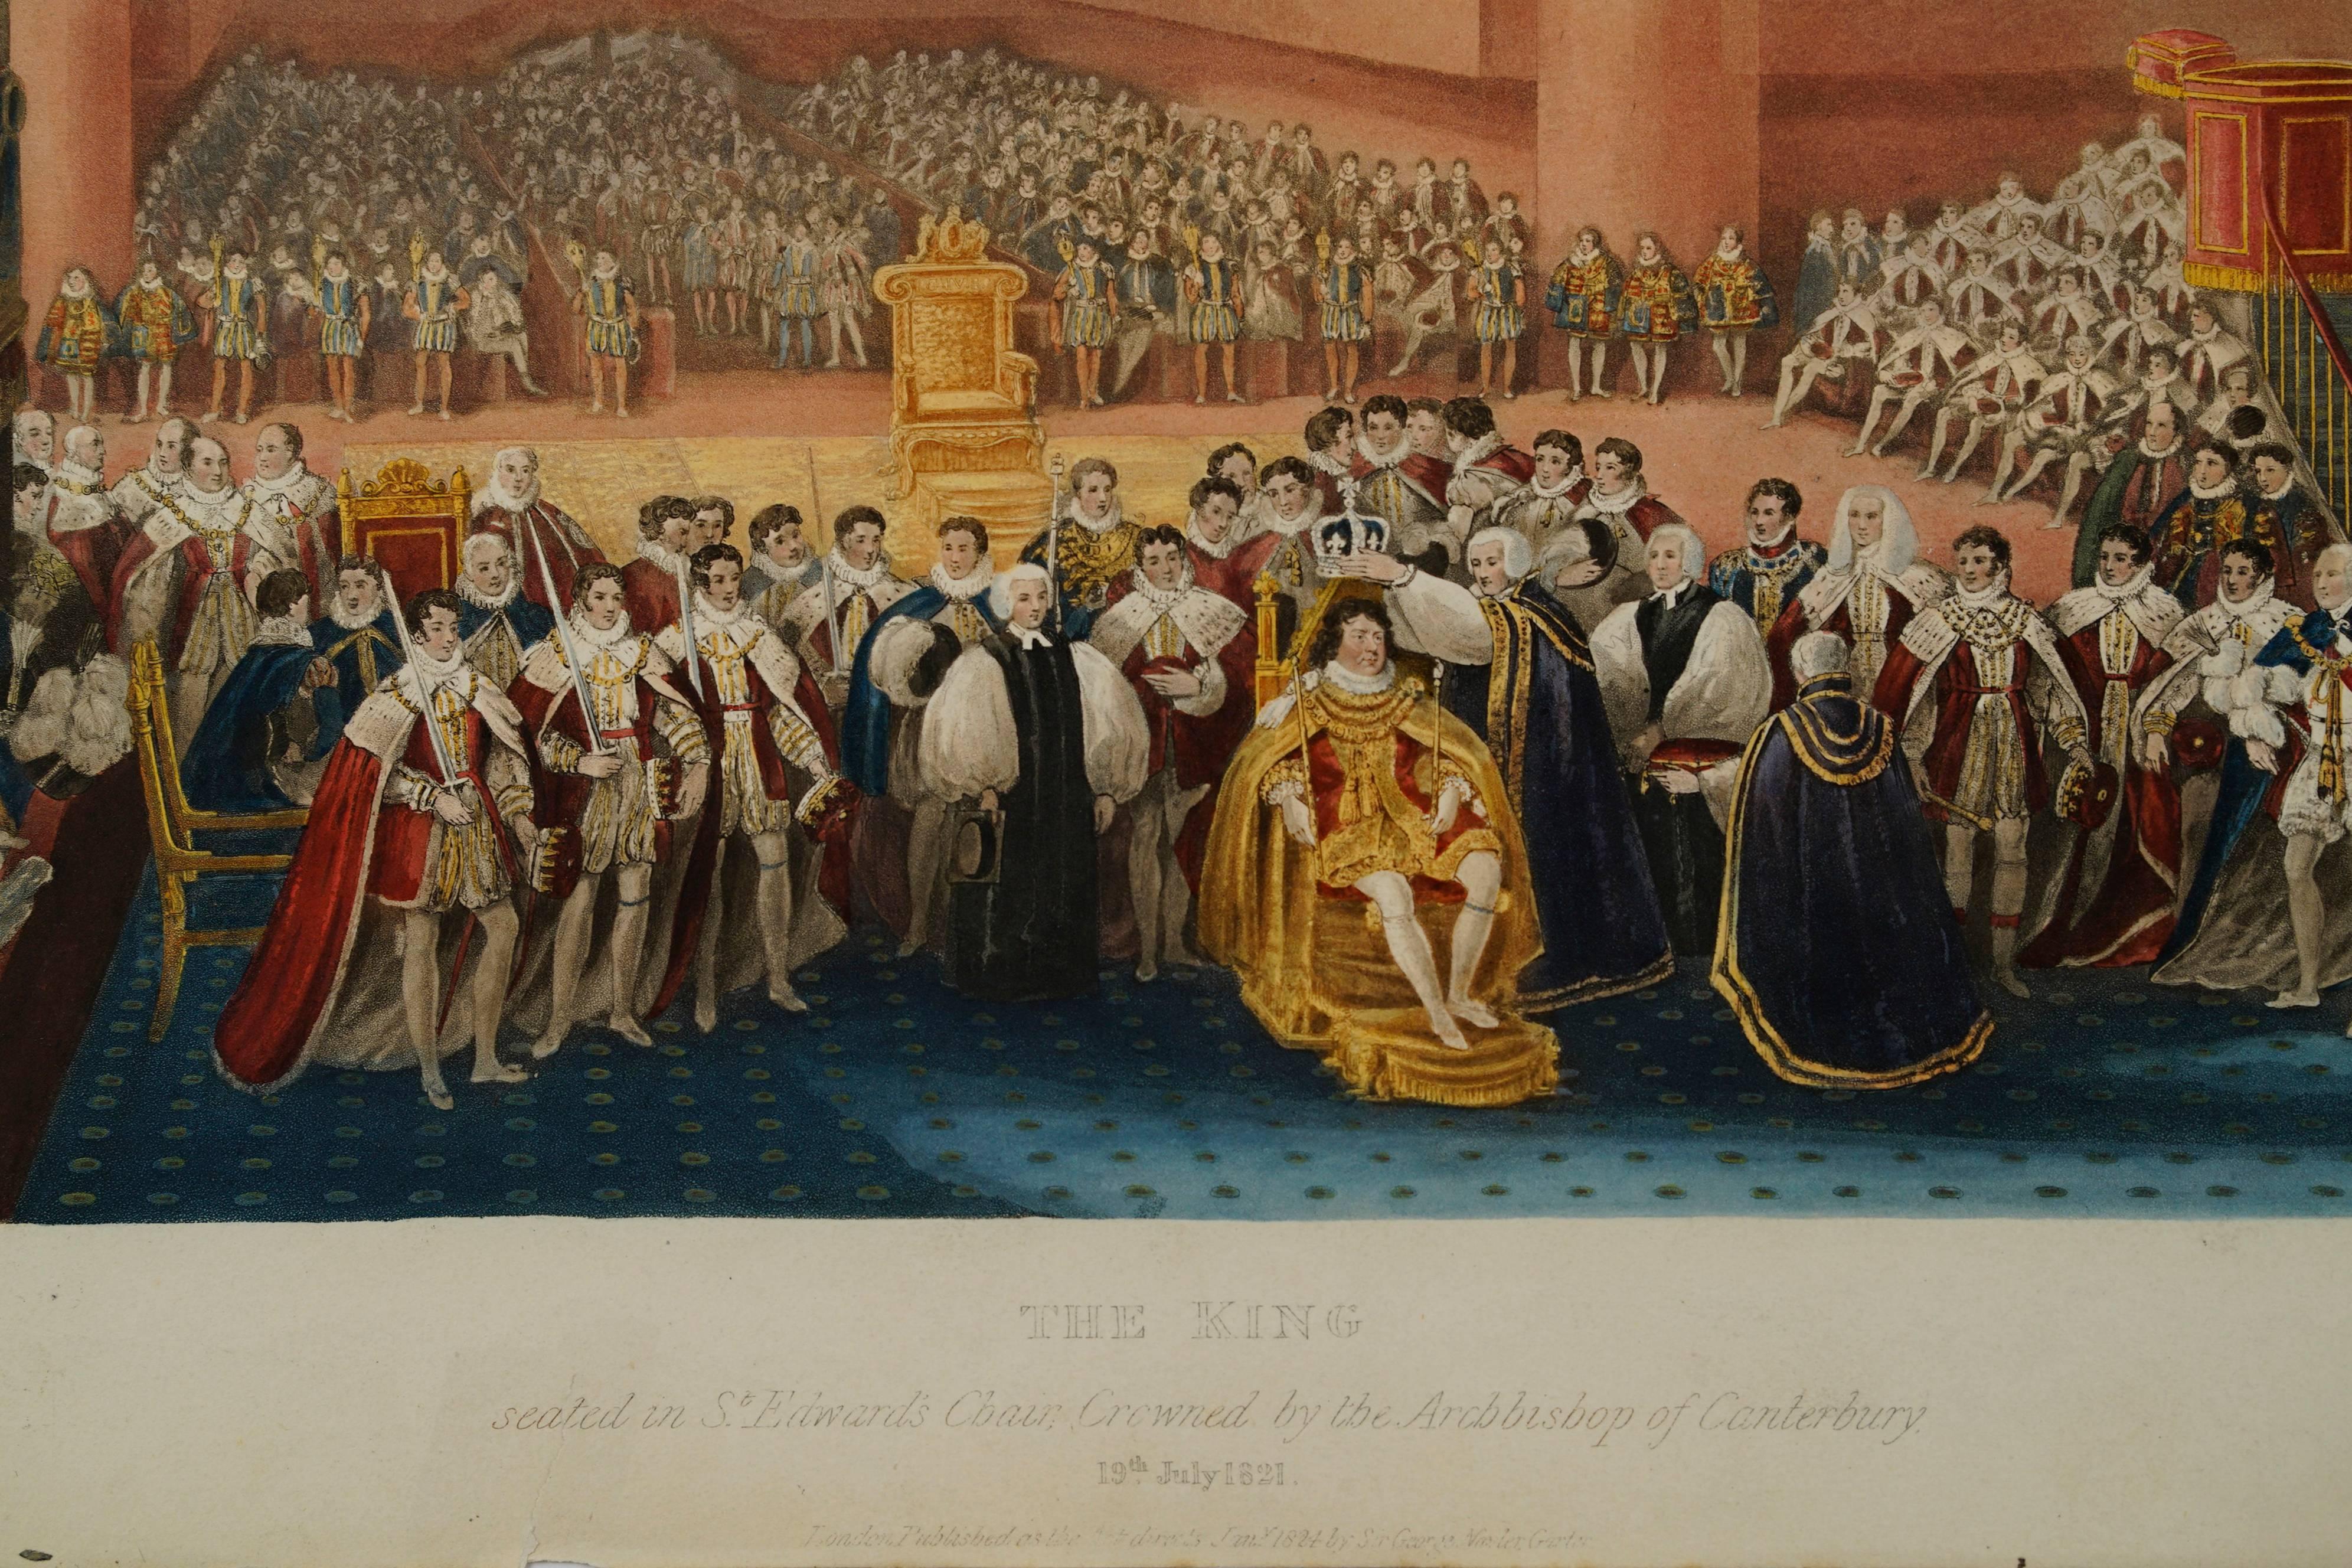 King George IV Seated in St. Edward's Chair Crowned by Archbishop of Canterbury - Print by James Stephanoff